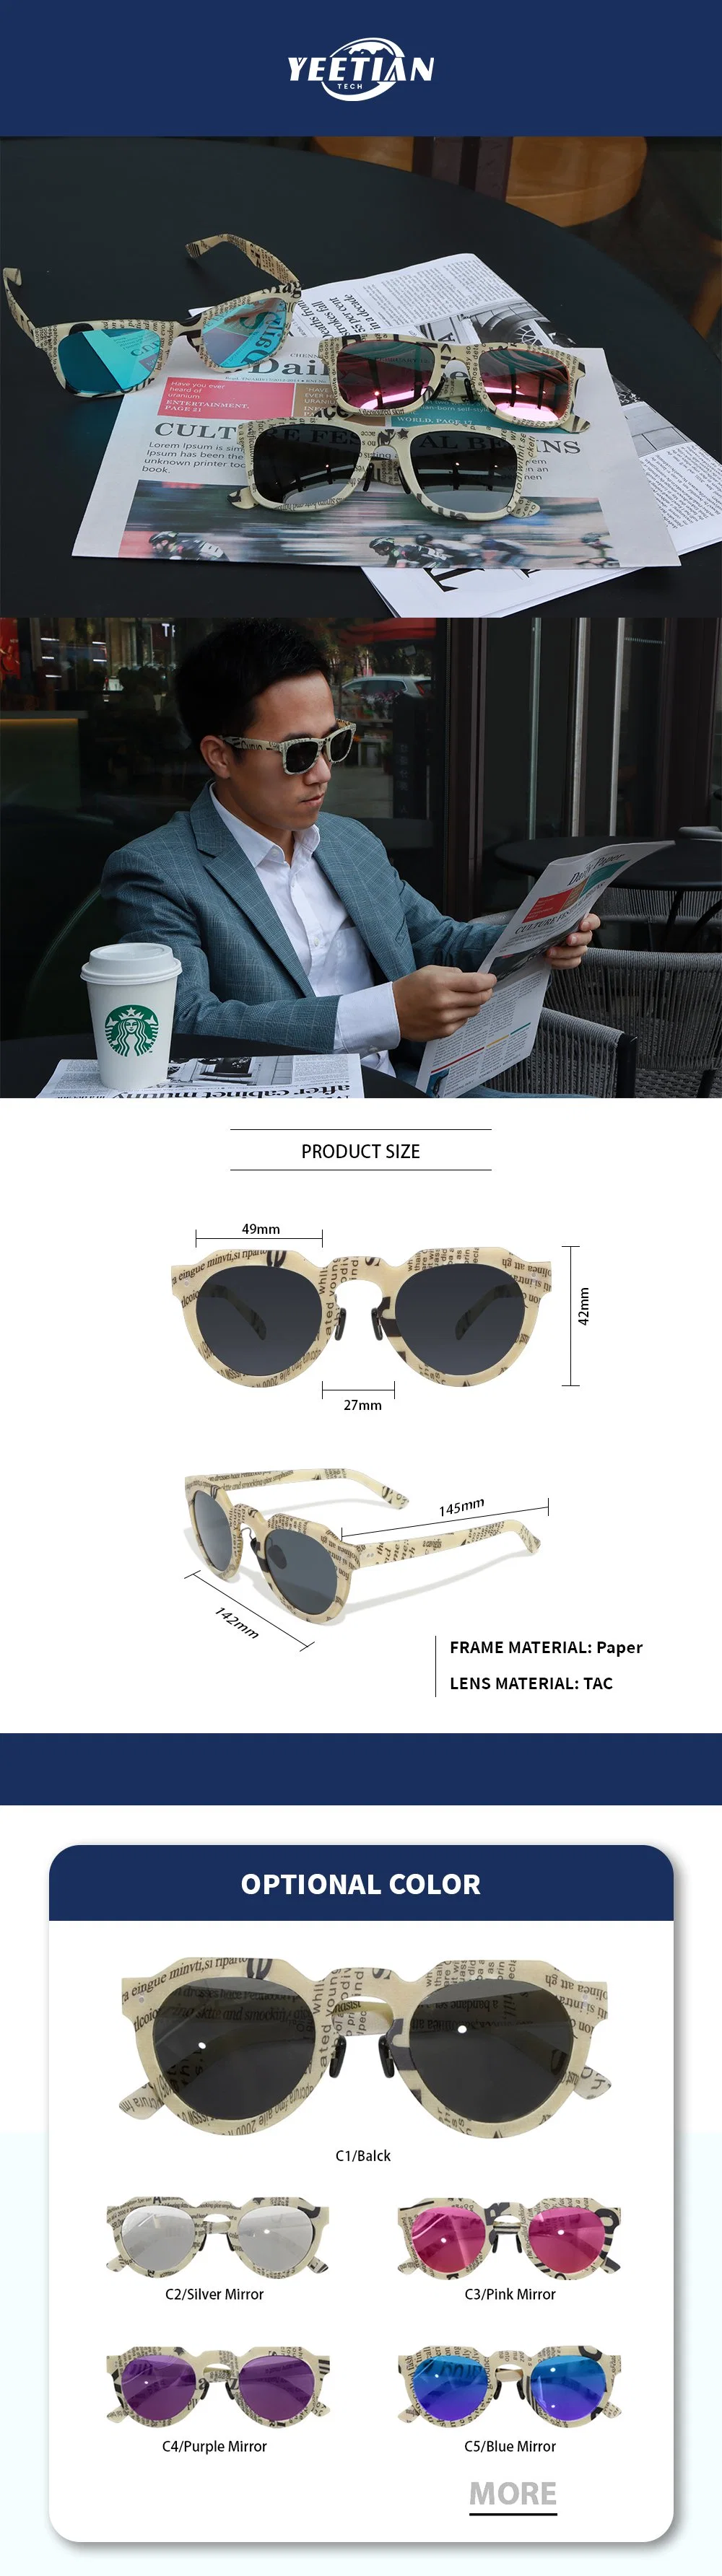 Yeetian Polarized Optical Lenses Retro Sunglasses Made of Recycled Paper Material